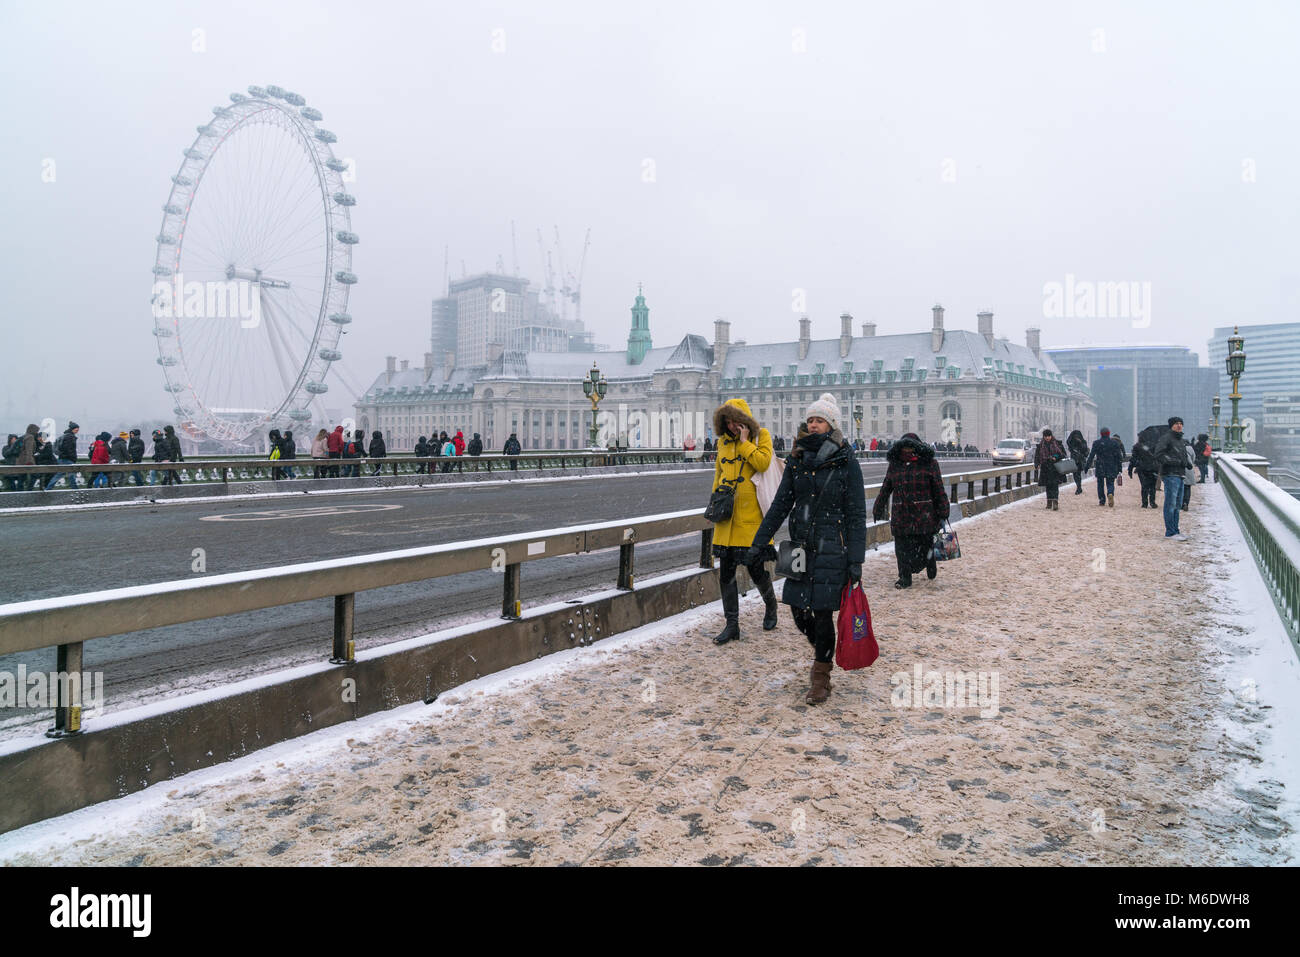 2nd March 2018 - England, London. People walking on snow at Westminister bridge. Stock Photo